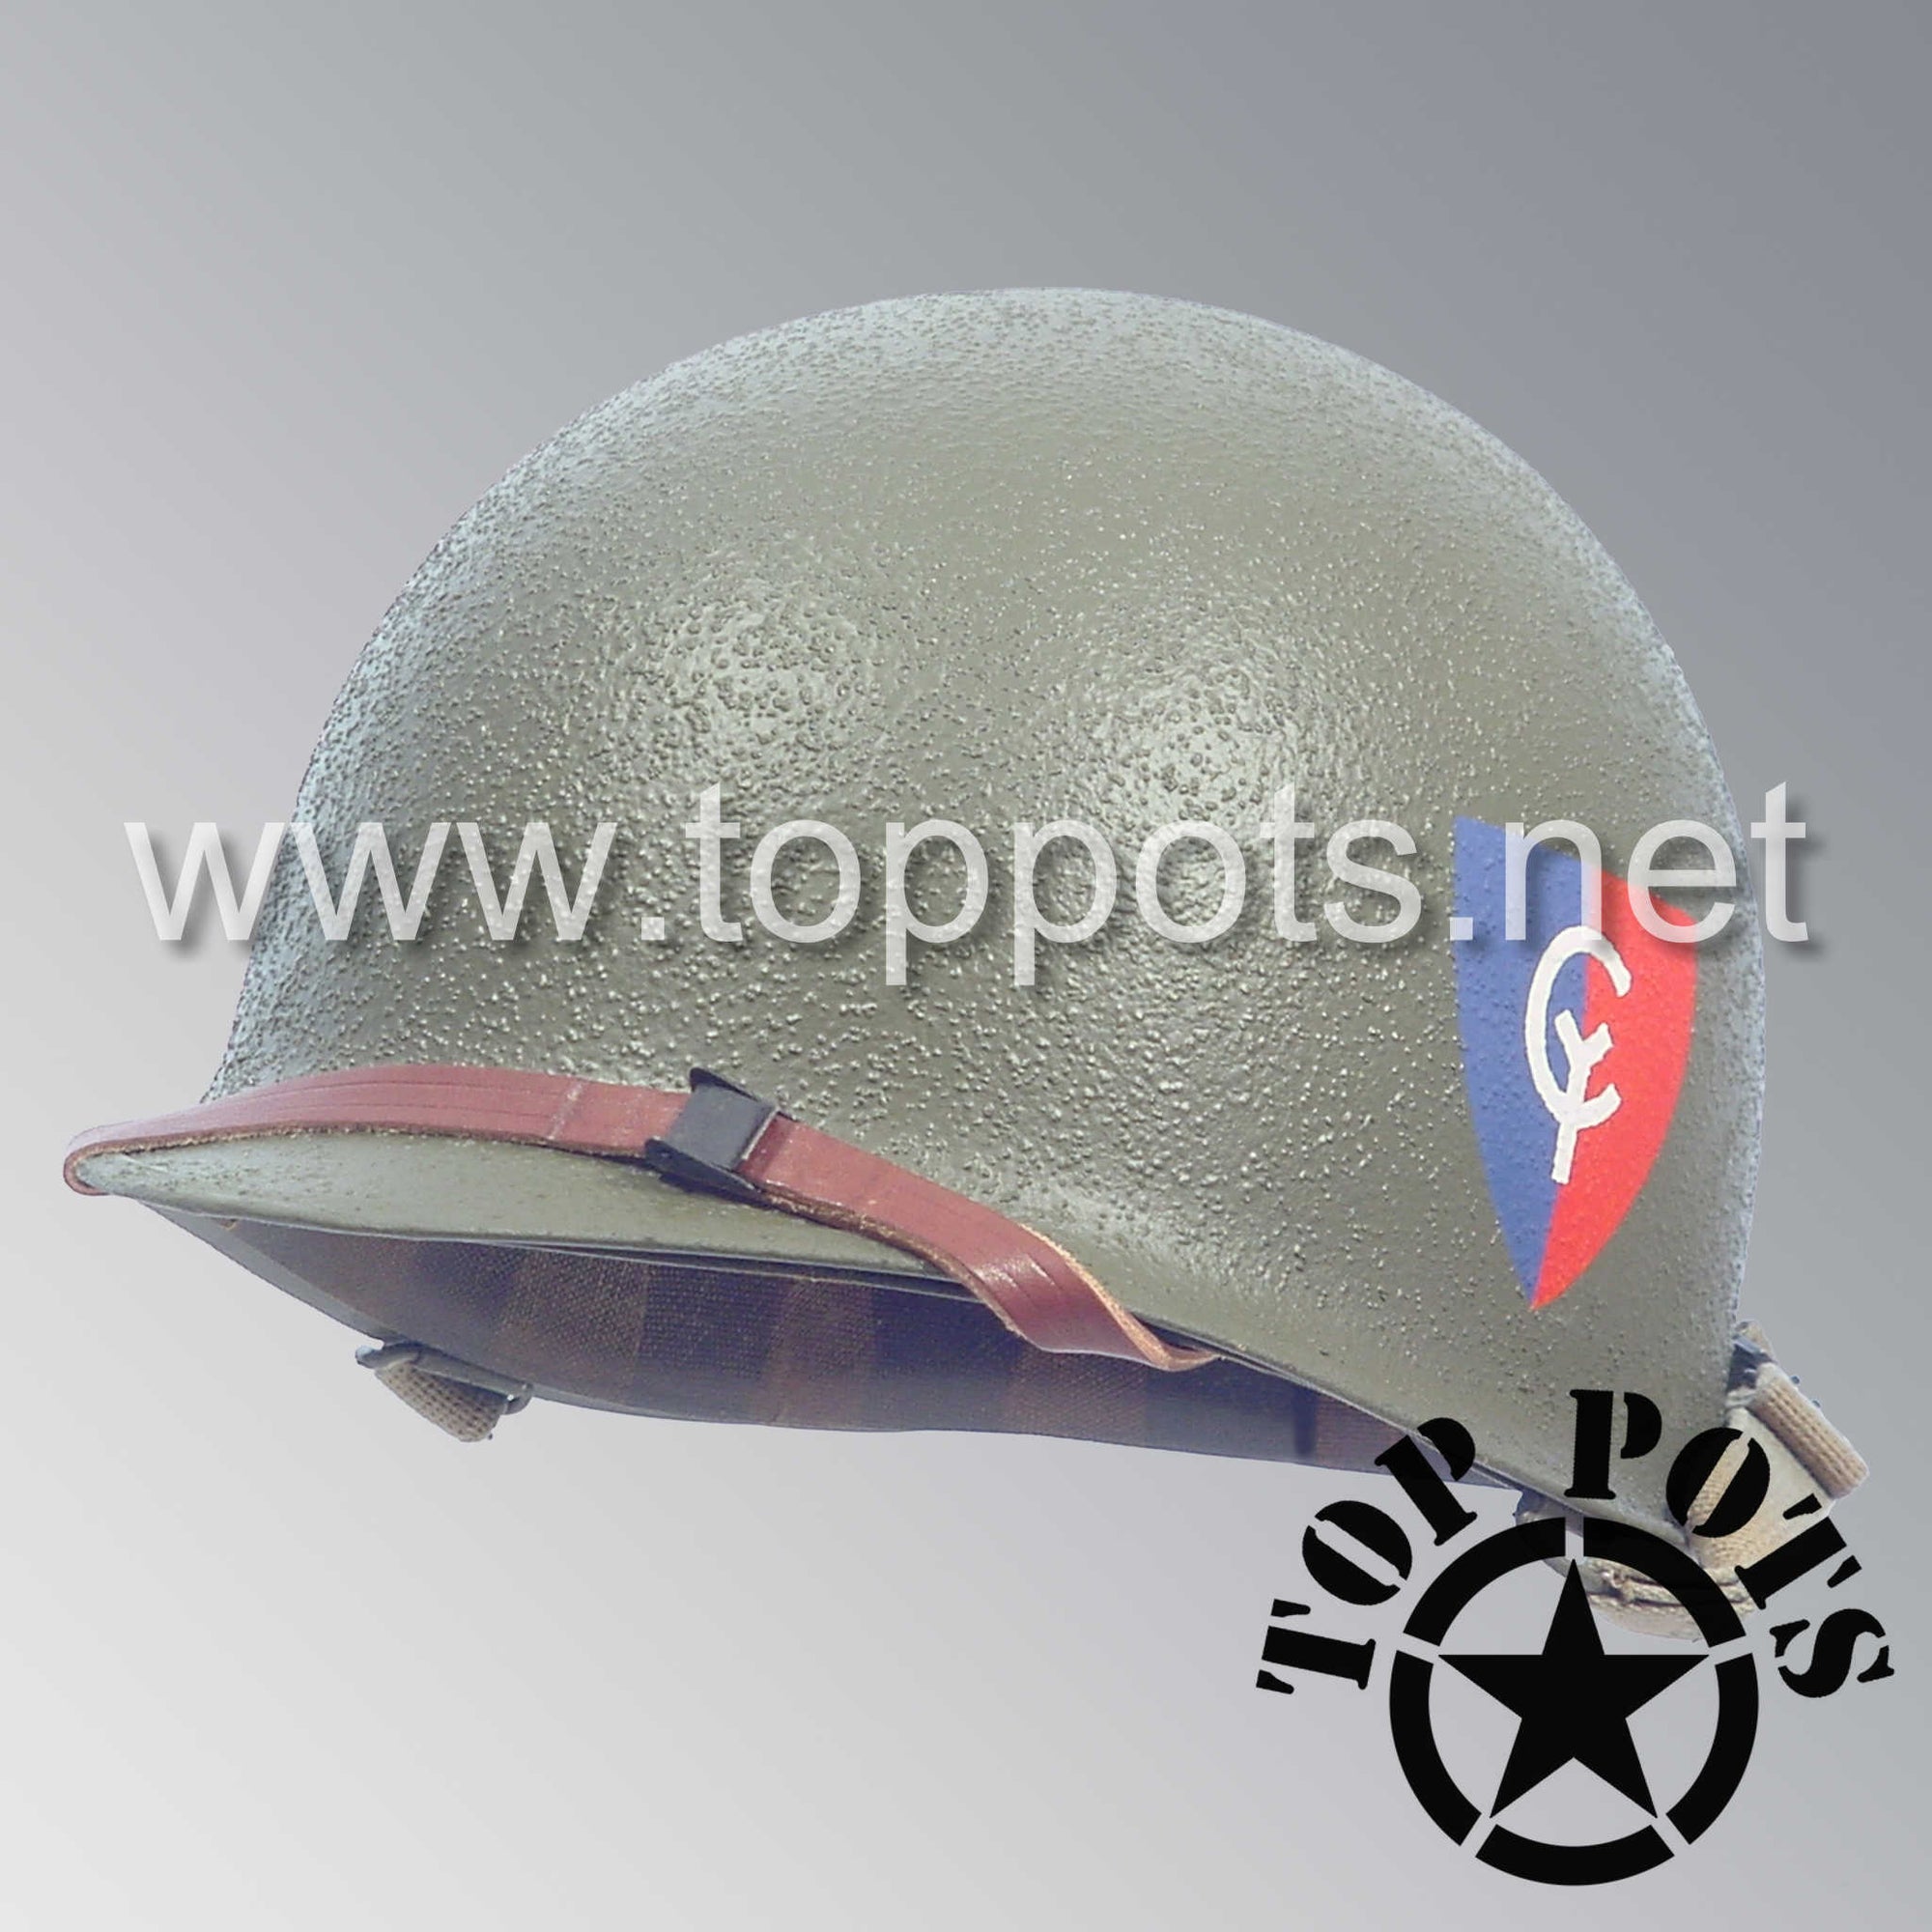 WWII US Army Restored Original M1 Infantry Helmet Swivel Bale Shell and Liner with 38th Infantry Division Emblem